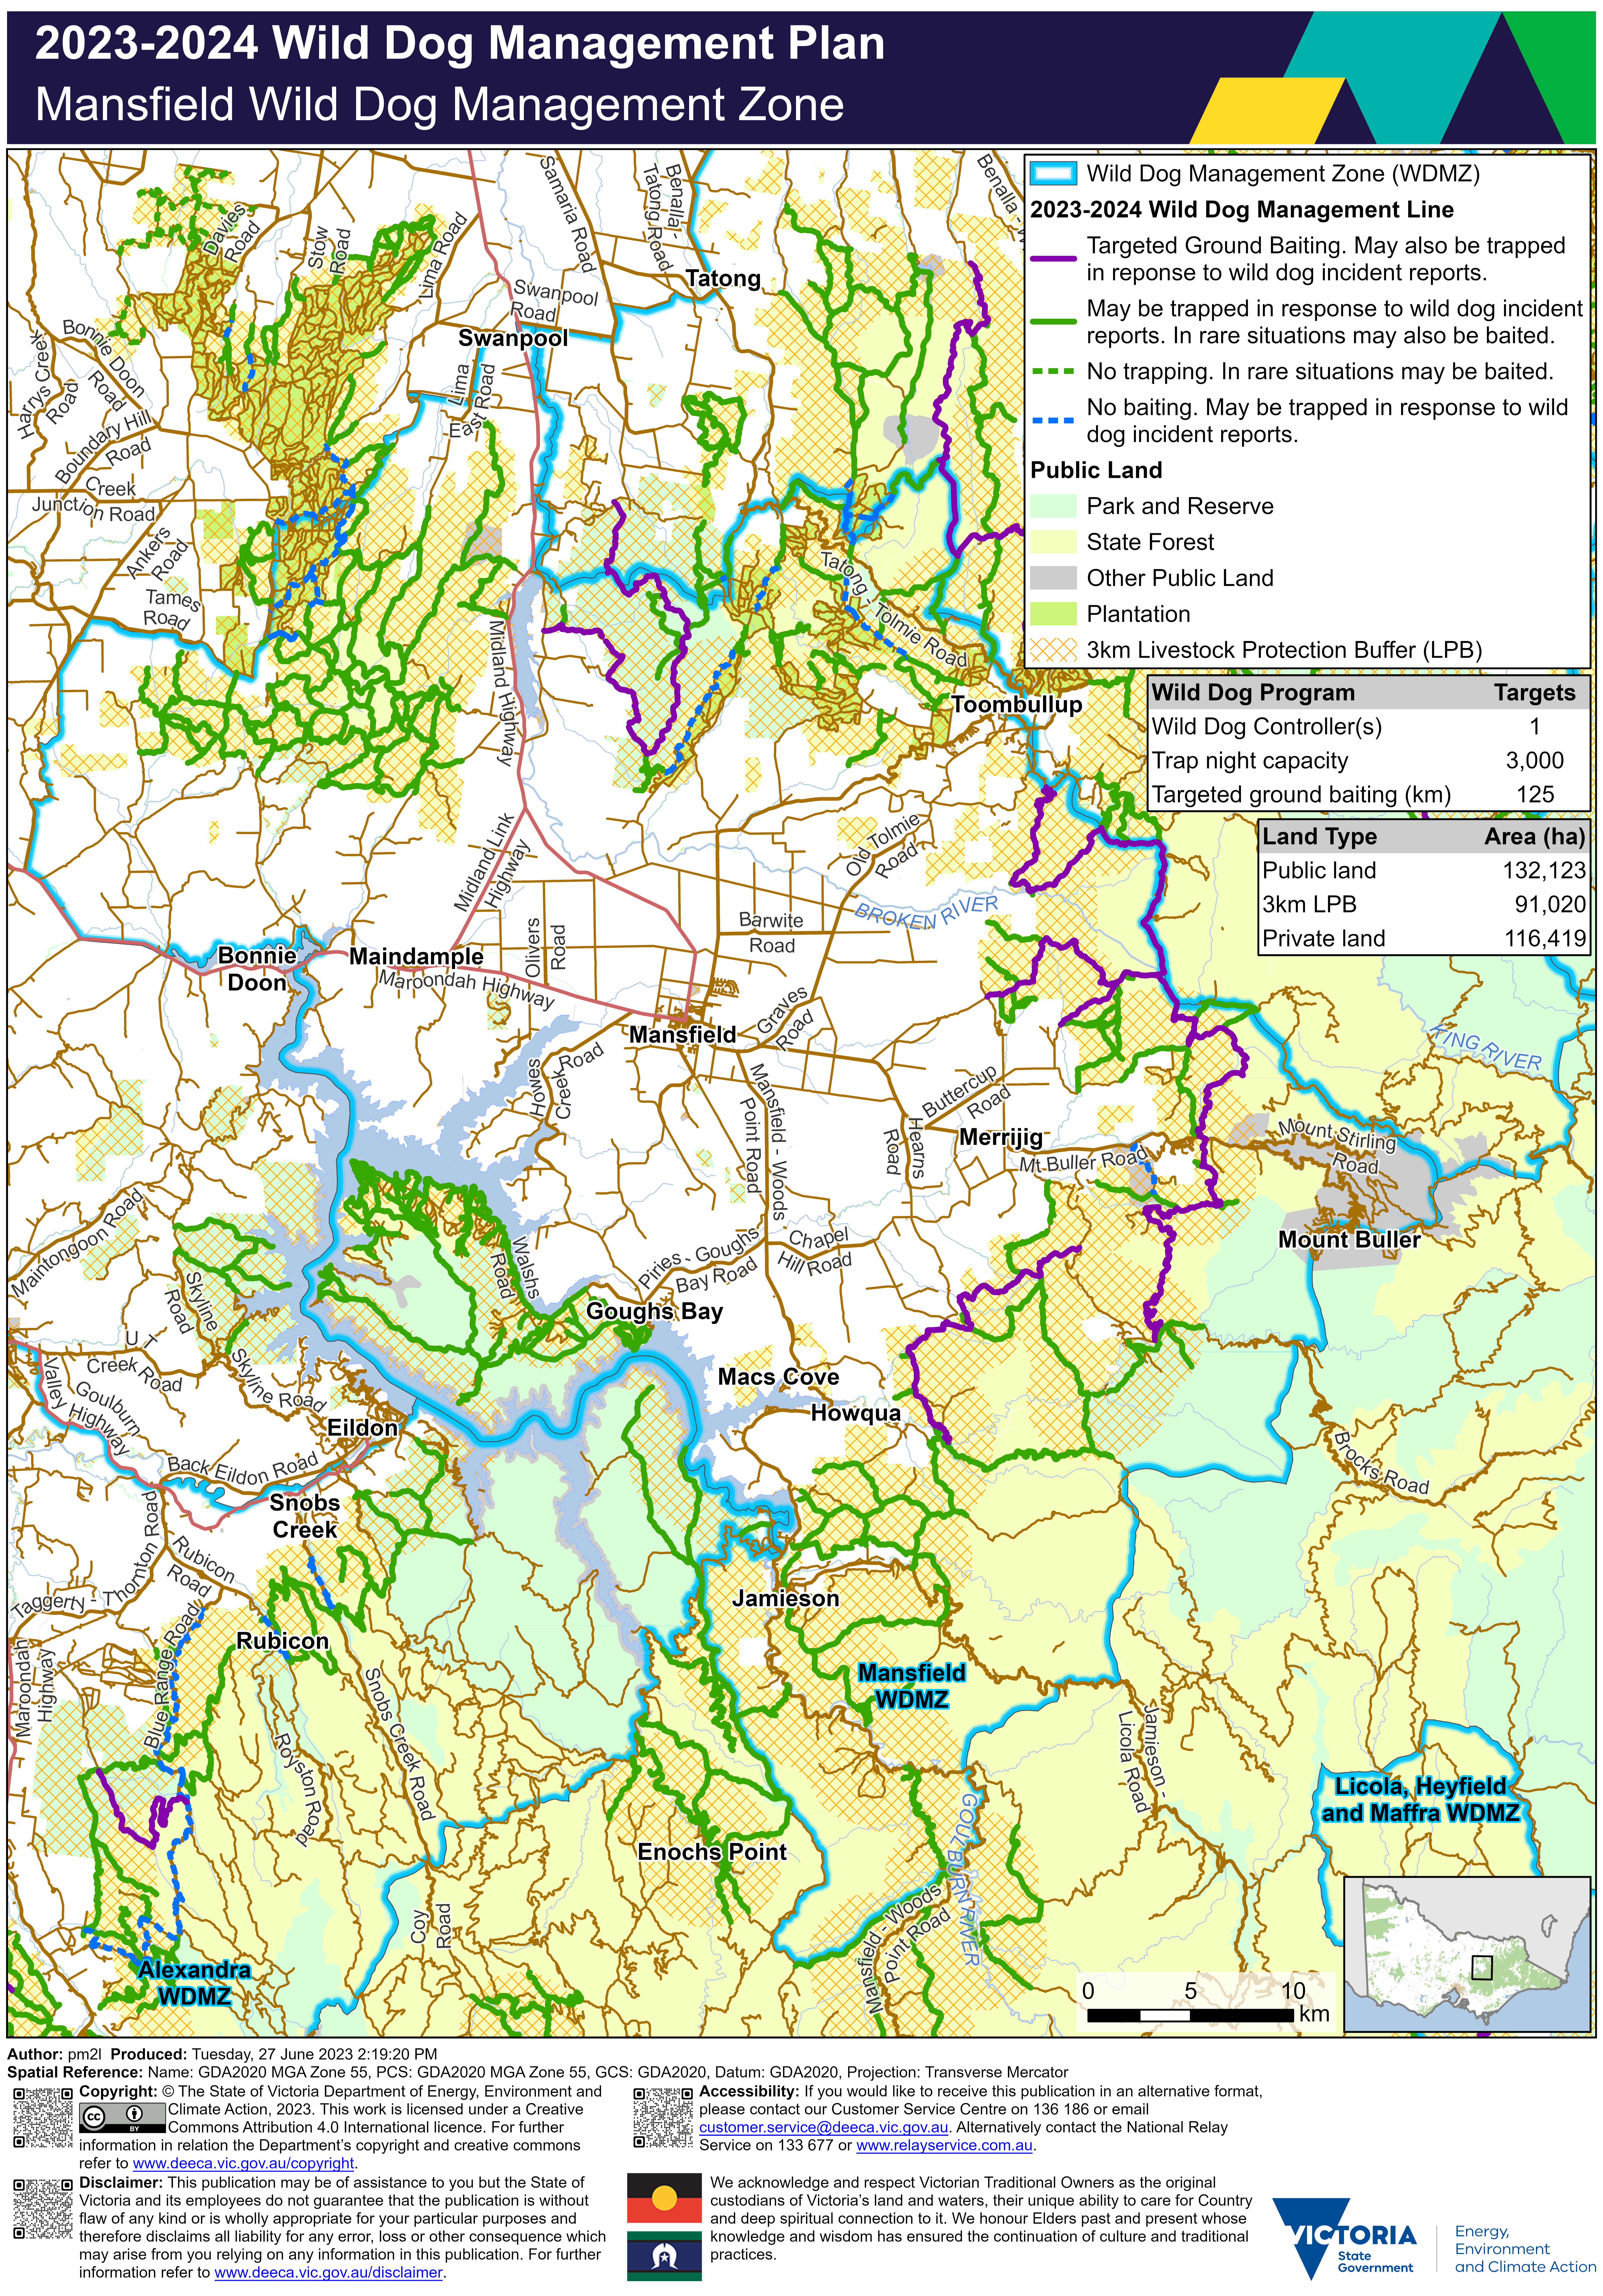 A detailed map of the Mansfield region showing the Mansfield wild dog management zone along with Trapping and Priority 1 and Priority 2 ground baiting transects. Further information below image.